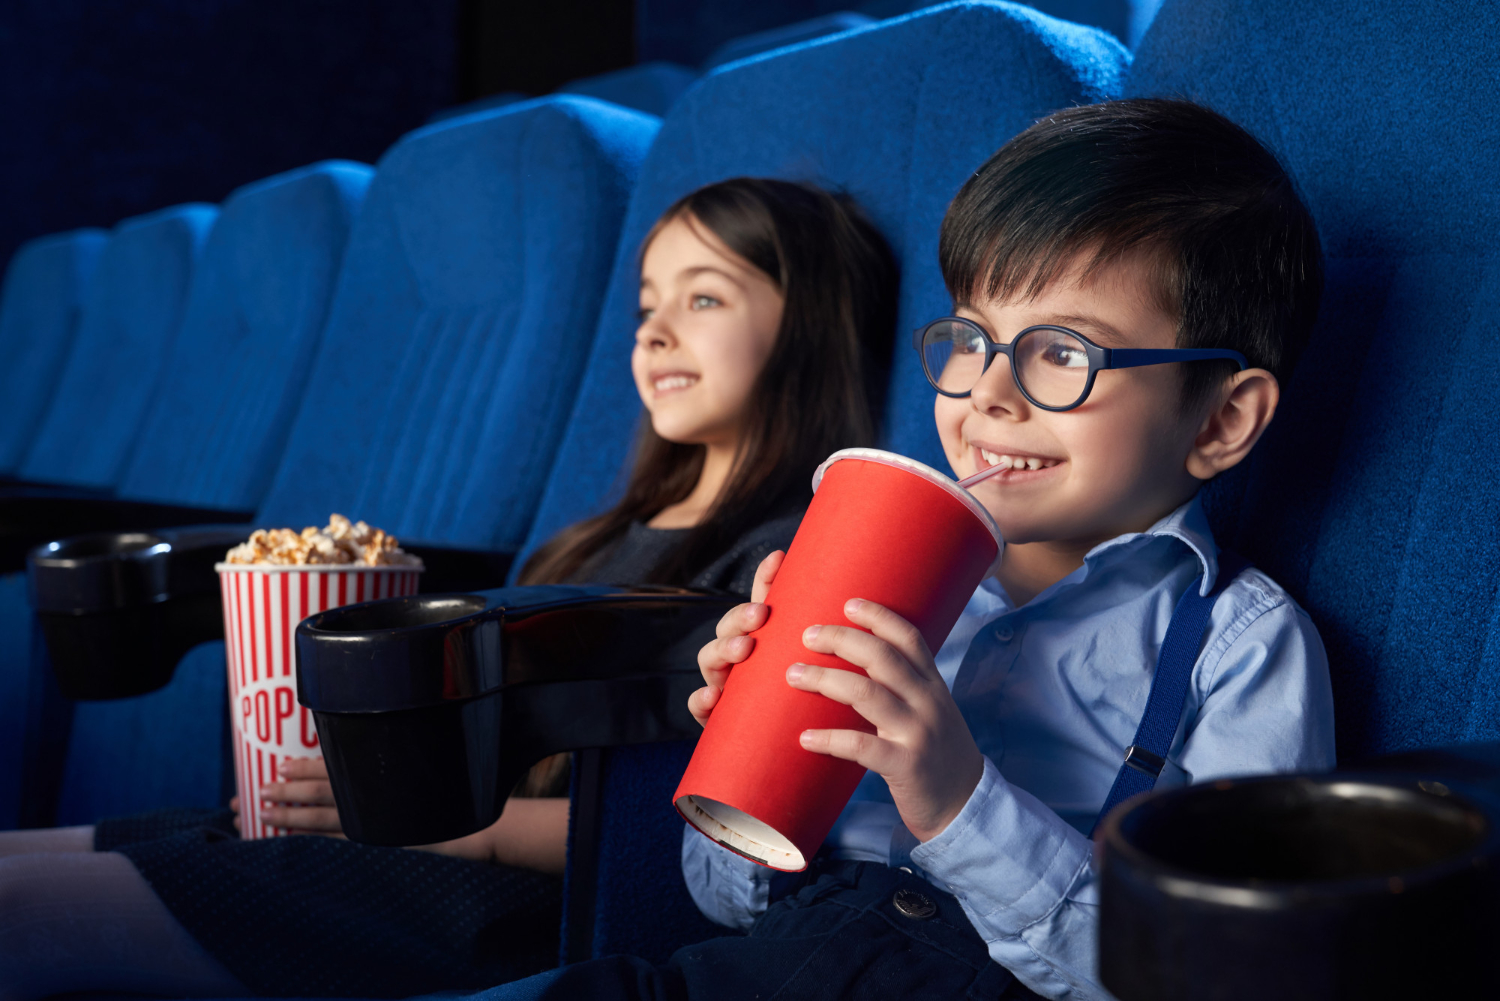 Sensory-friendly movie outings for autism families: Preparation tips.